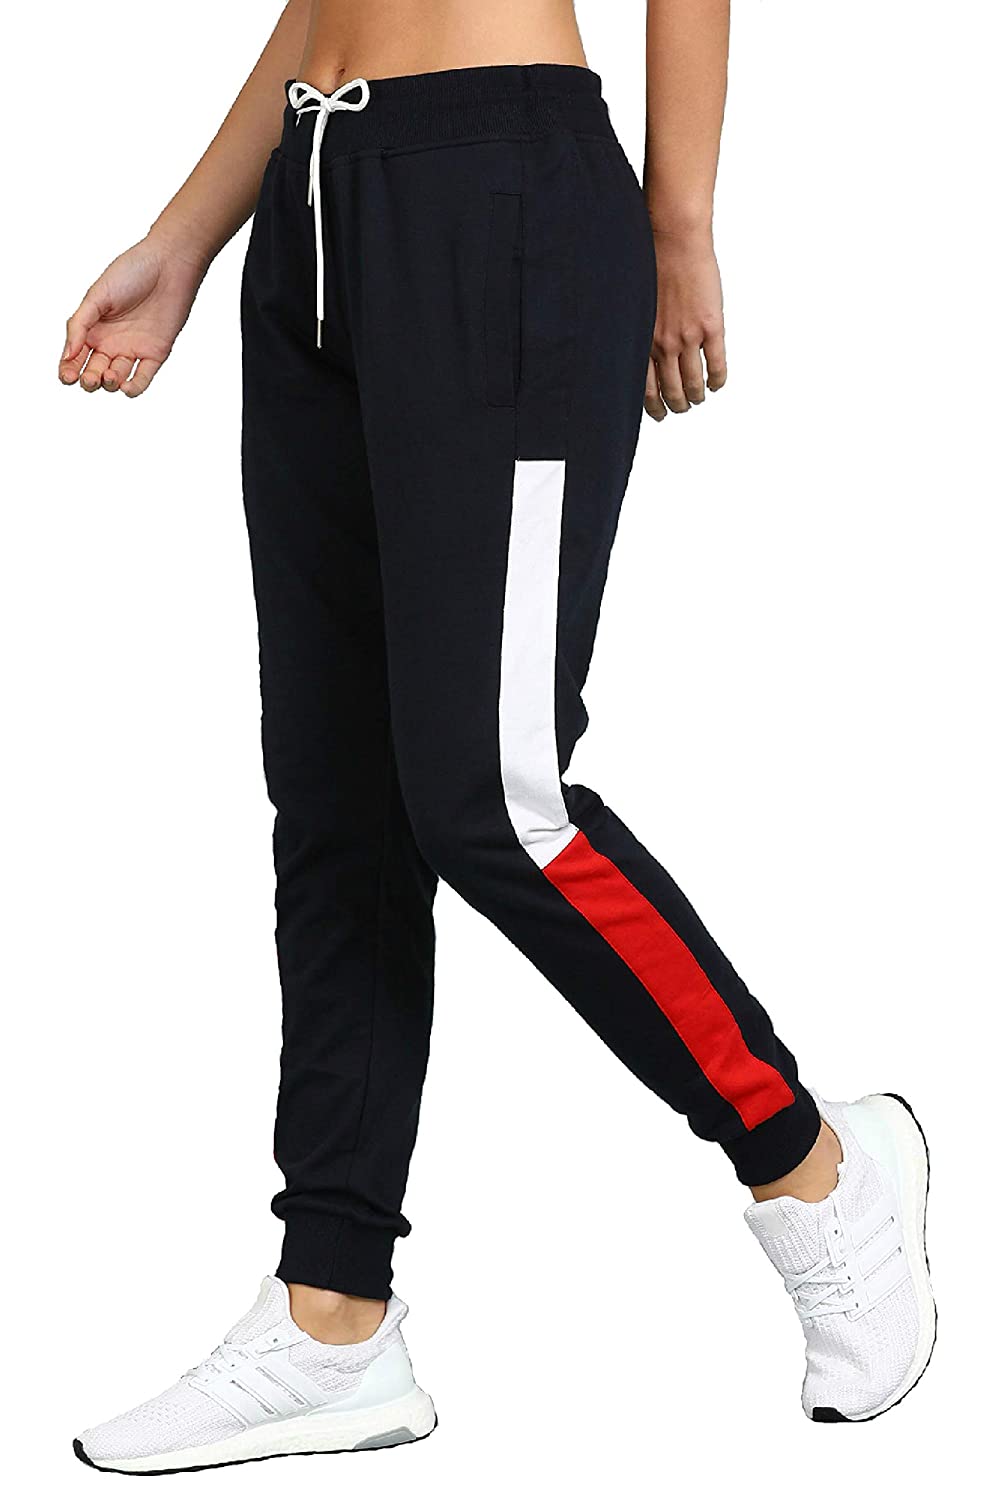 27 Best Sweatpants You Can Wear Anywhere | Teen Vogue